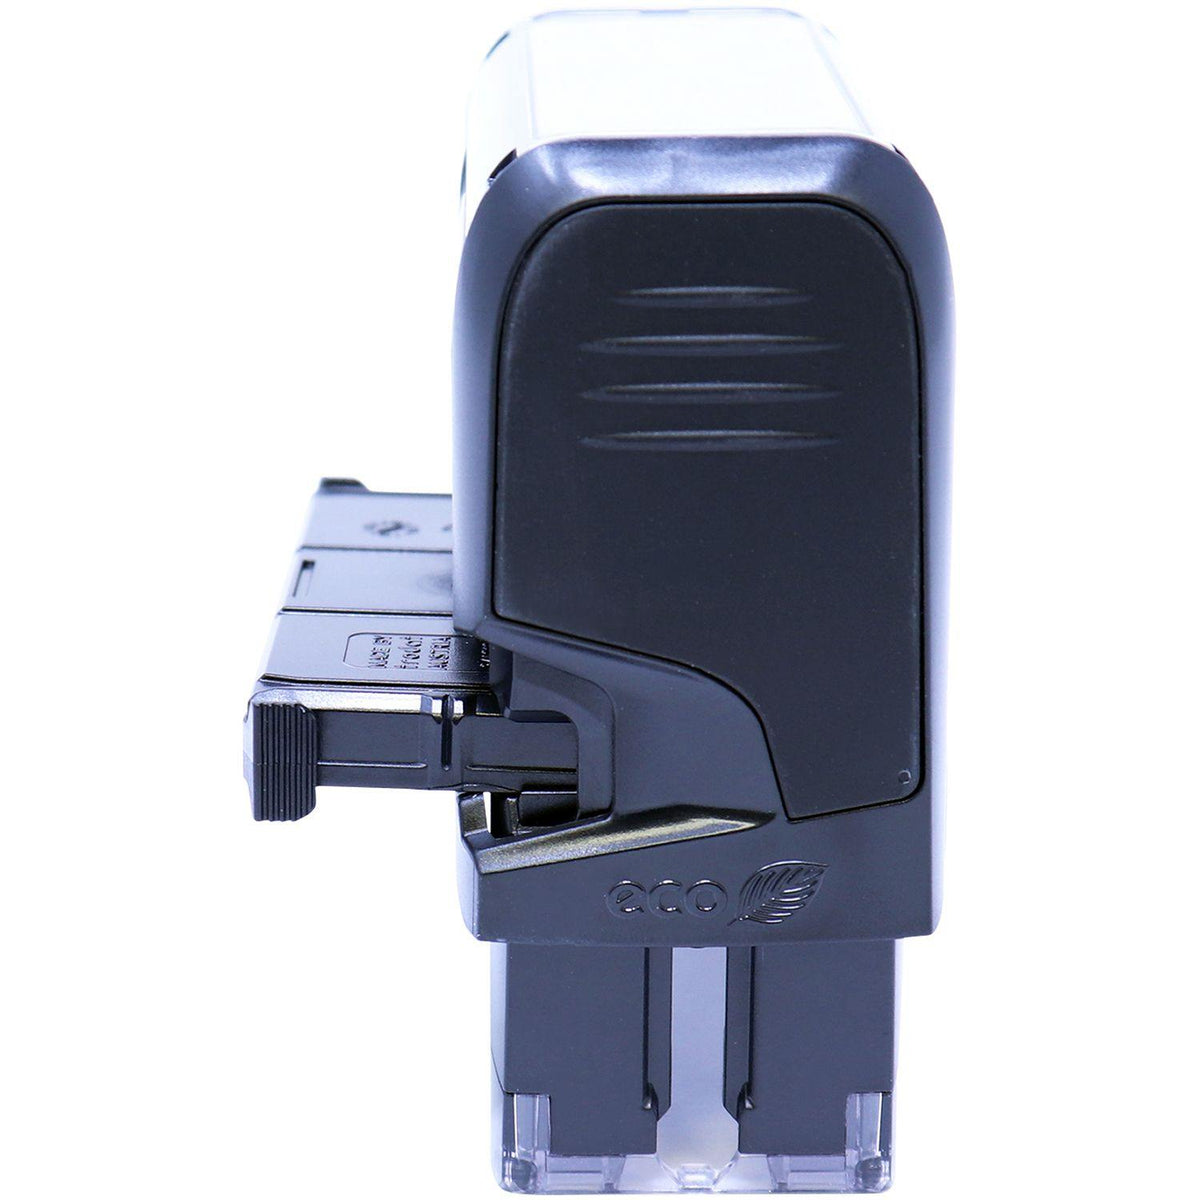 Self-Inking Duplicado Stamp - Engineer Seal Stamps - Brand_Trodat, Impression Size_Small, Stamp Type_Self-Inking Stamp, Type of Use_General, Type of Use_Office